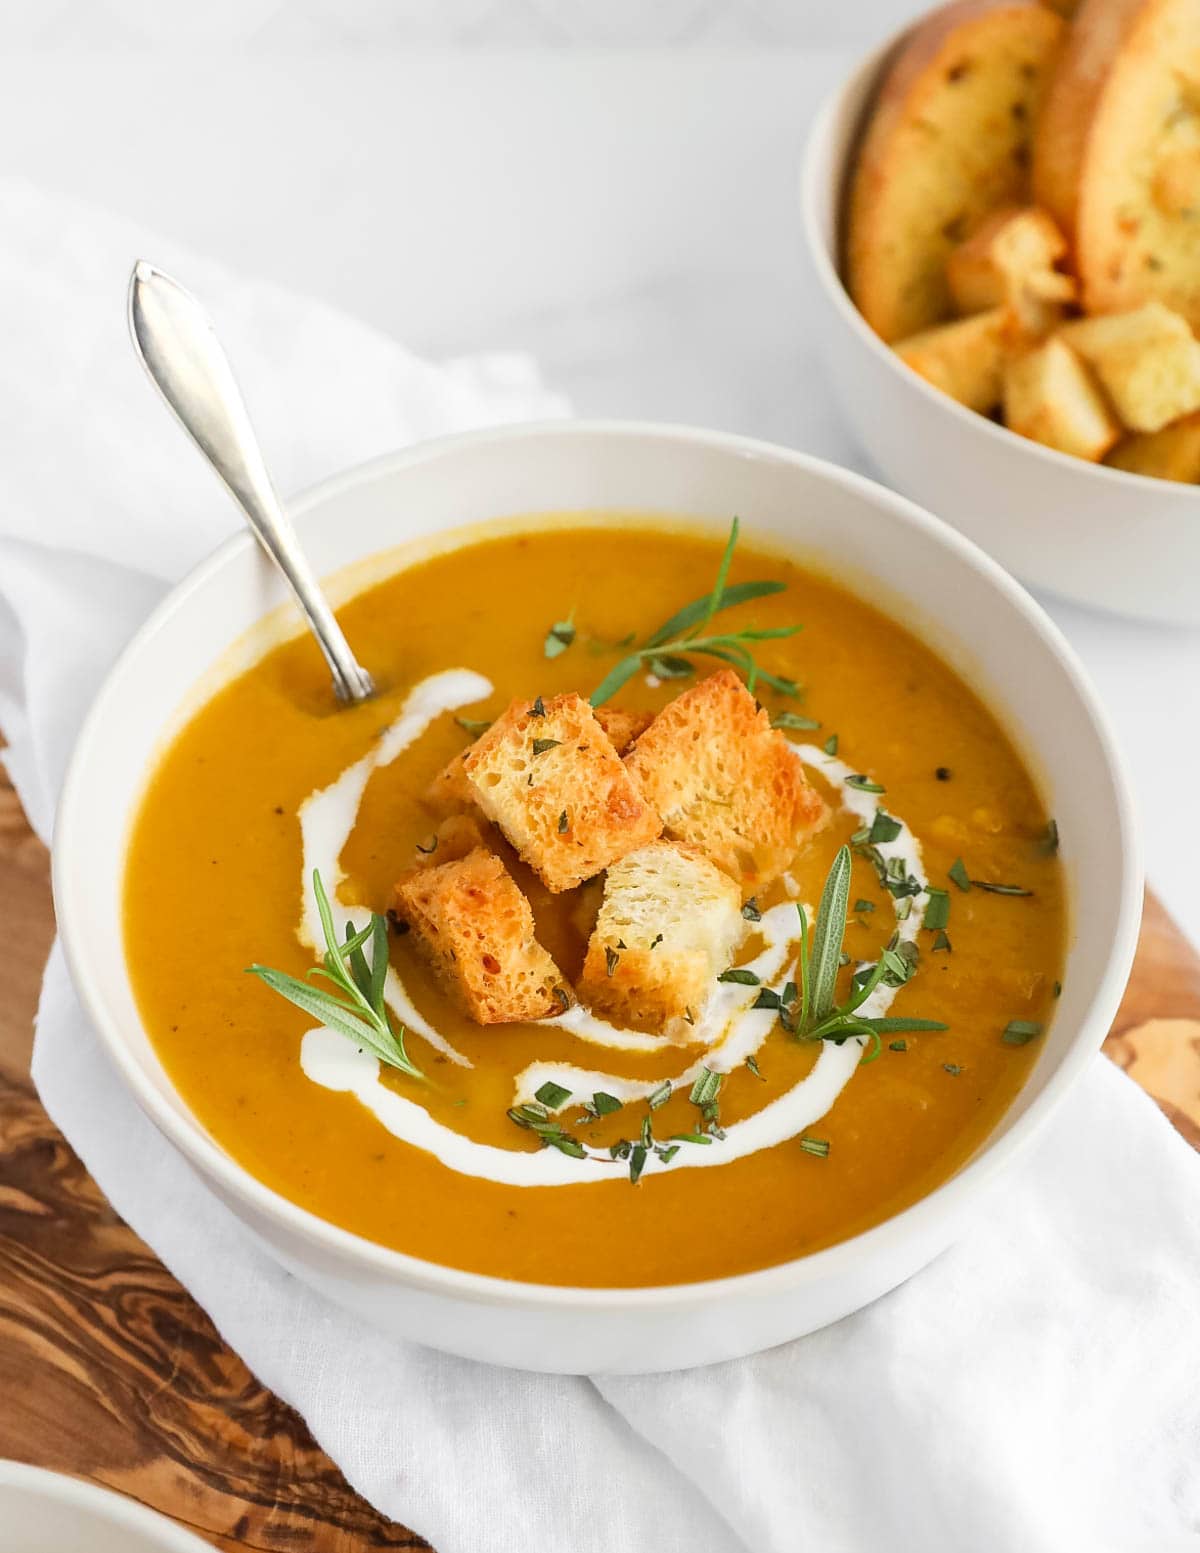 A large white bowl of orange squash soup with croutons, herbs, and coconut milk on top. There is a spoon sitting in the soup.